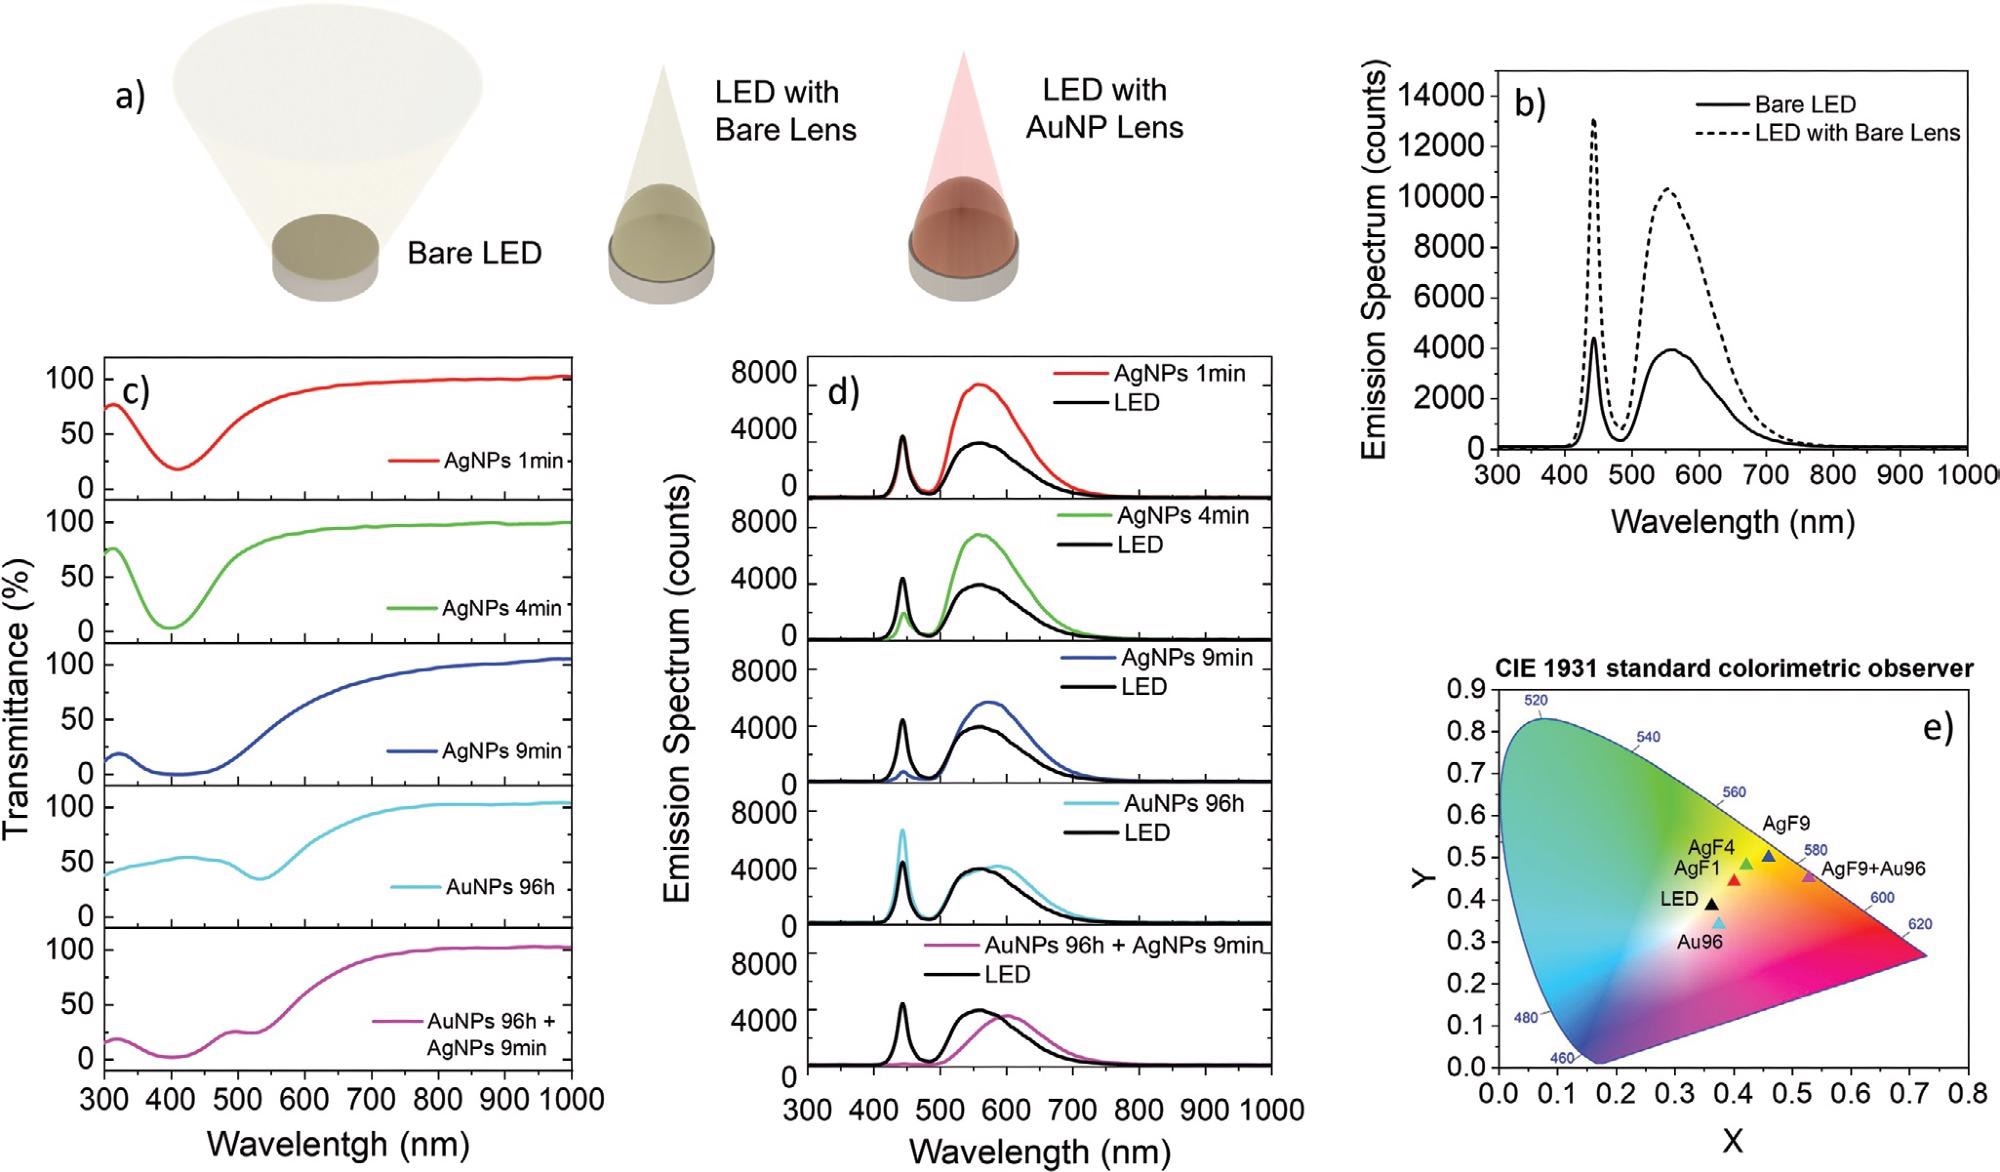 Lighting application of the PDMS lens decorated with AgNPs and/or AuNPs coupled to a white commercial LED. a) Sketch of the experimental configuration for the lighting application test. b) Emission spectra of a commercial white LED with/without a bare lens. c) Transmittance spectra of the PDMS lenses decorated with: AgNPs for 1, 4, and 9 min; AuNPs for 96 h; AgNPs for 9 min + AuNPs for 96 h. d) Emission spectrum of the bare white LED (black trace) superimposed to spectra of the LED coupled with PDMS lenses decorated with AgNPs and AuNPs as in (c). e) Spectral data from (d) represented in a CIE 1931 diagram of the colour perceived by the human eye.